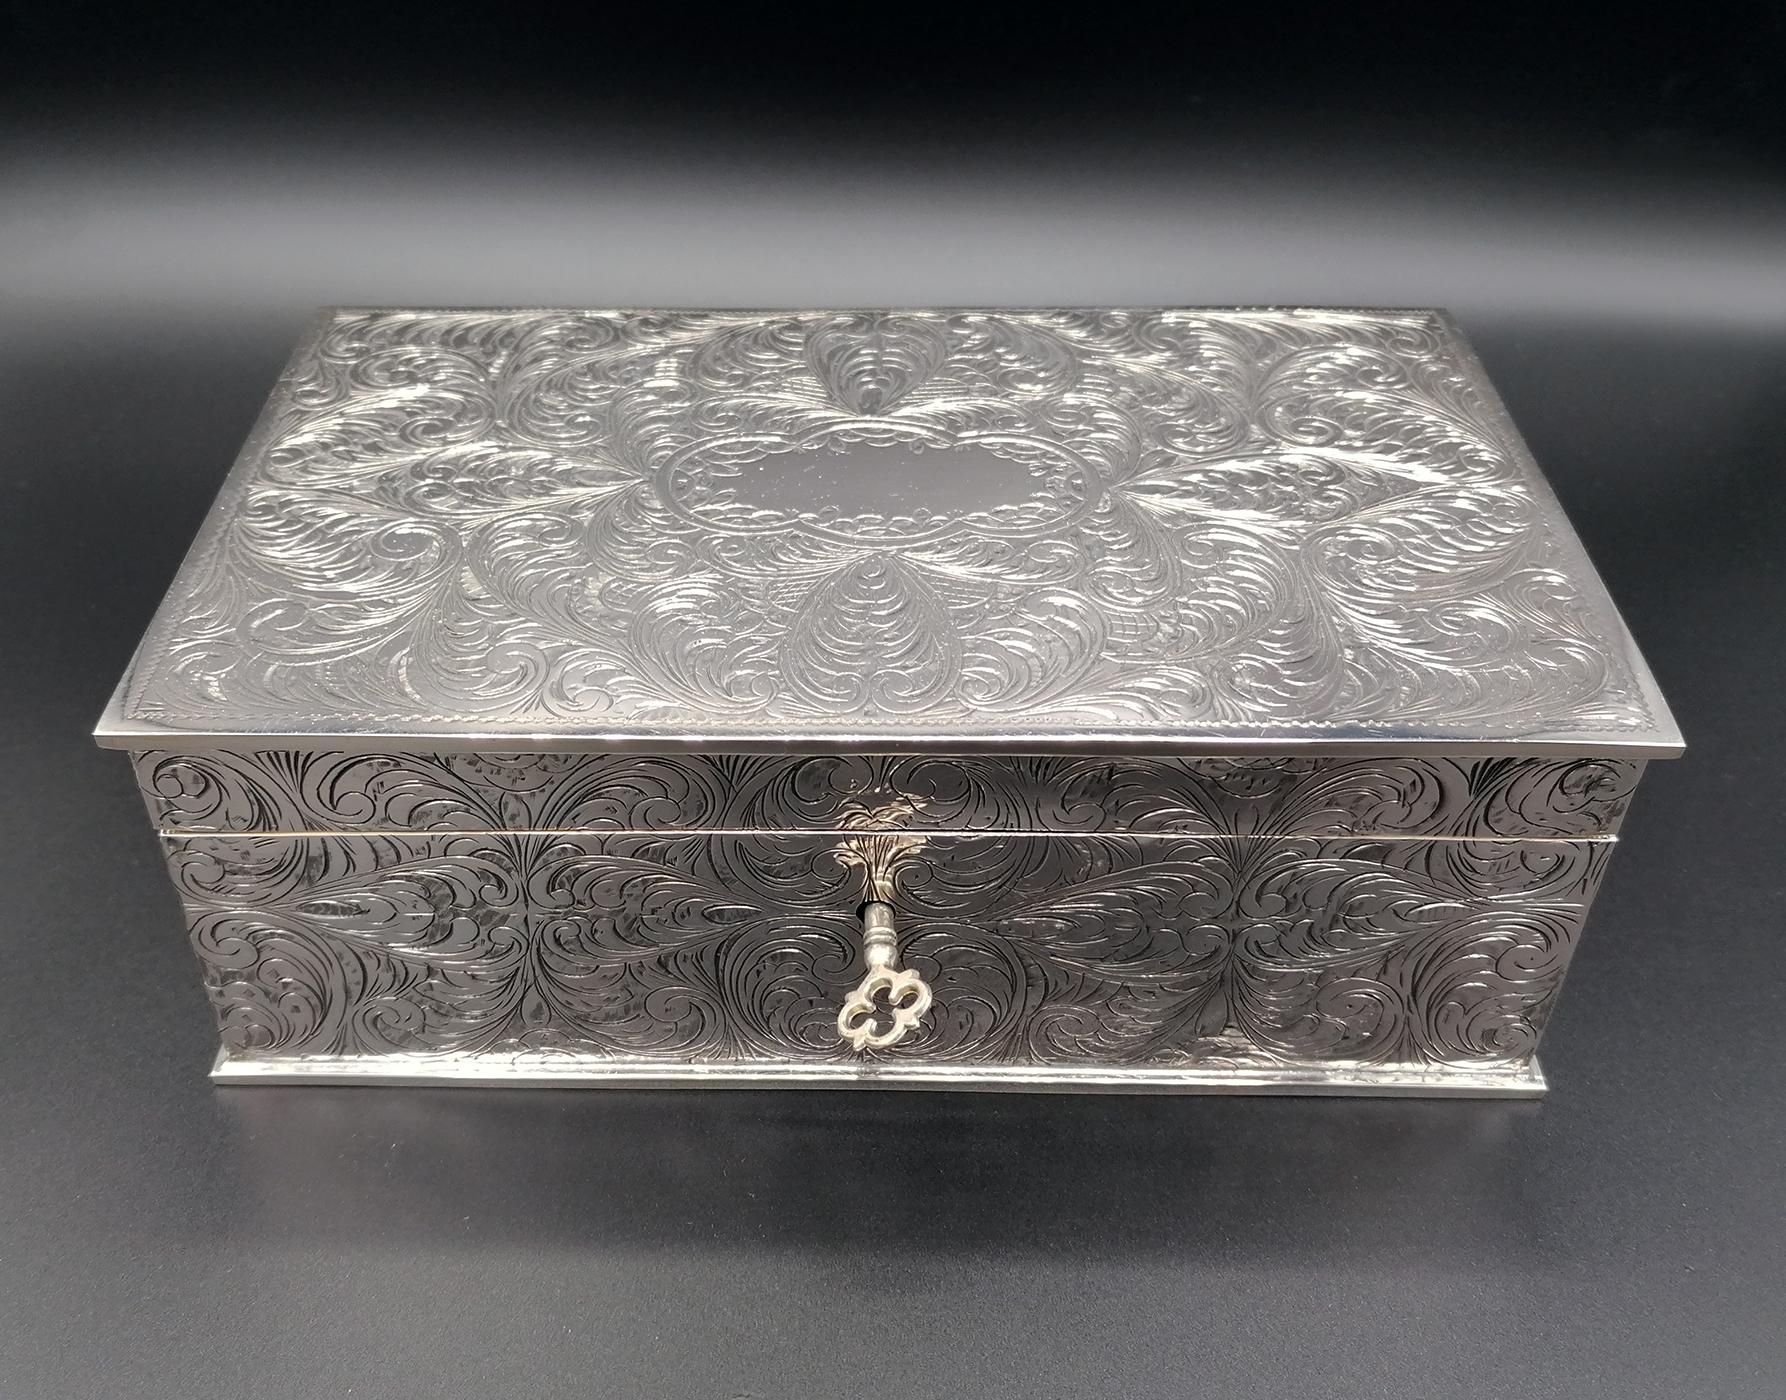 Rectangular jewelry box. The box was made of 800 solid silver and completely hand engraved with typical scrolls of engravings that were fashionable in Renaissance Florence.

The interior is completely covered in dark red velvet and complete with a